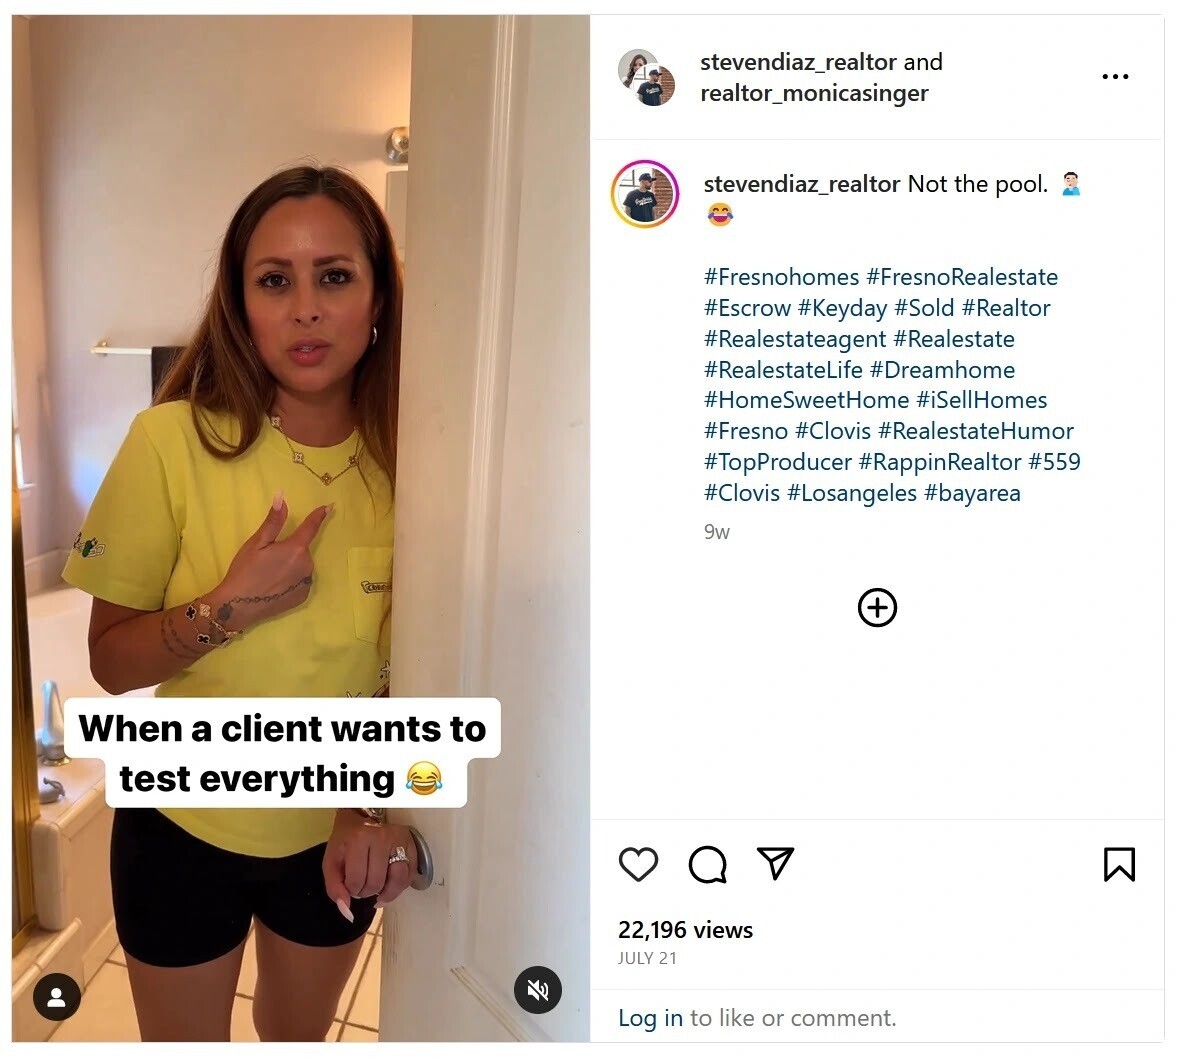 Instagram reel using humor about real estate world